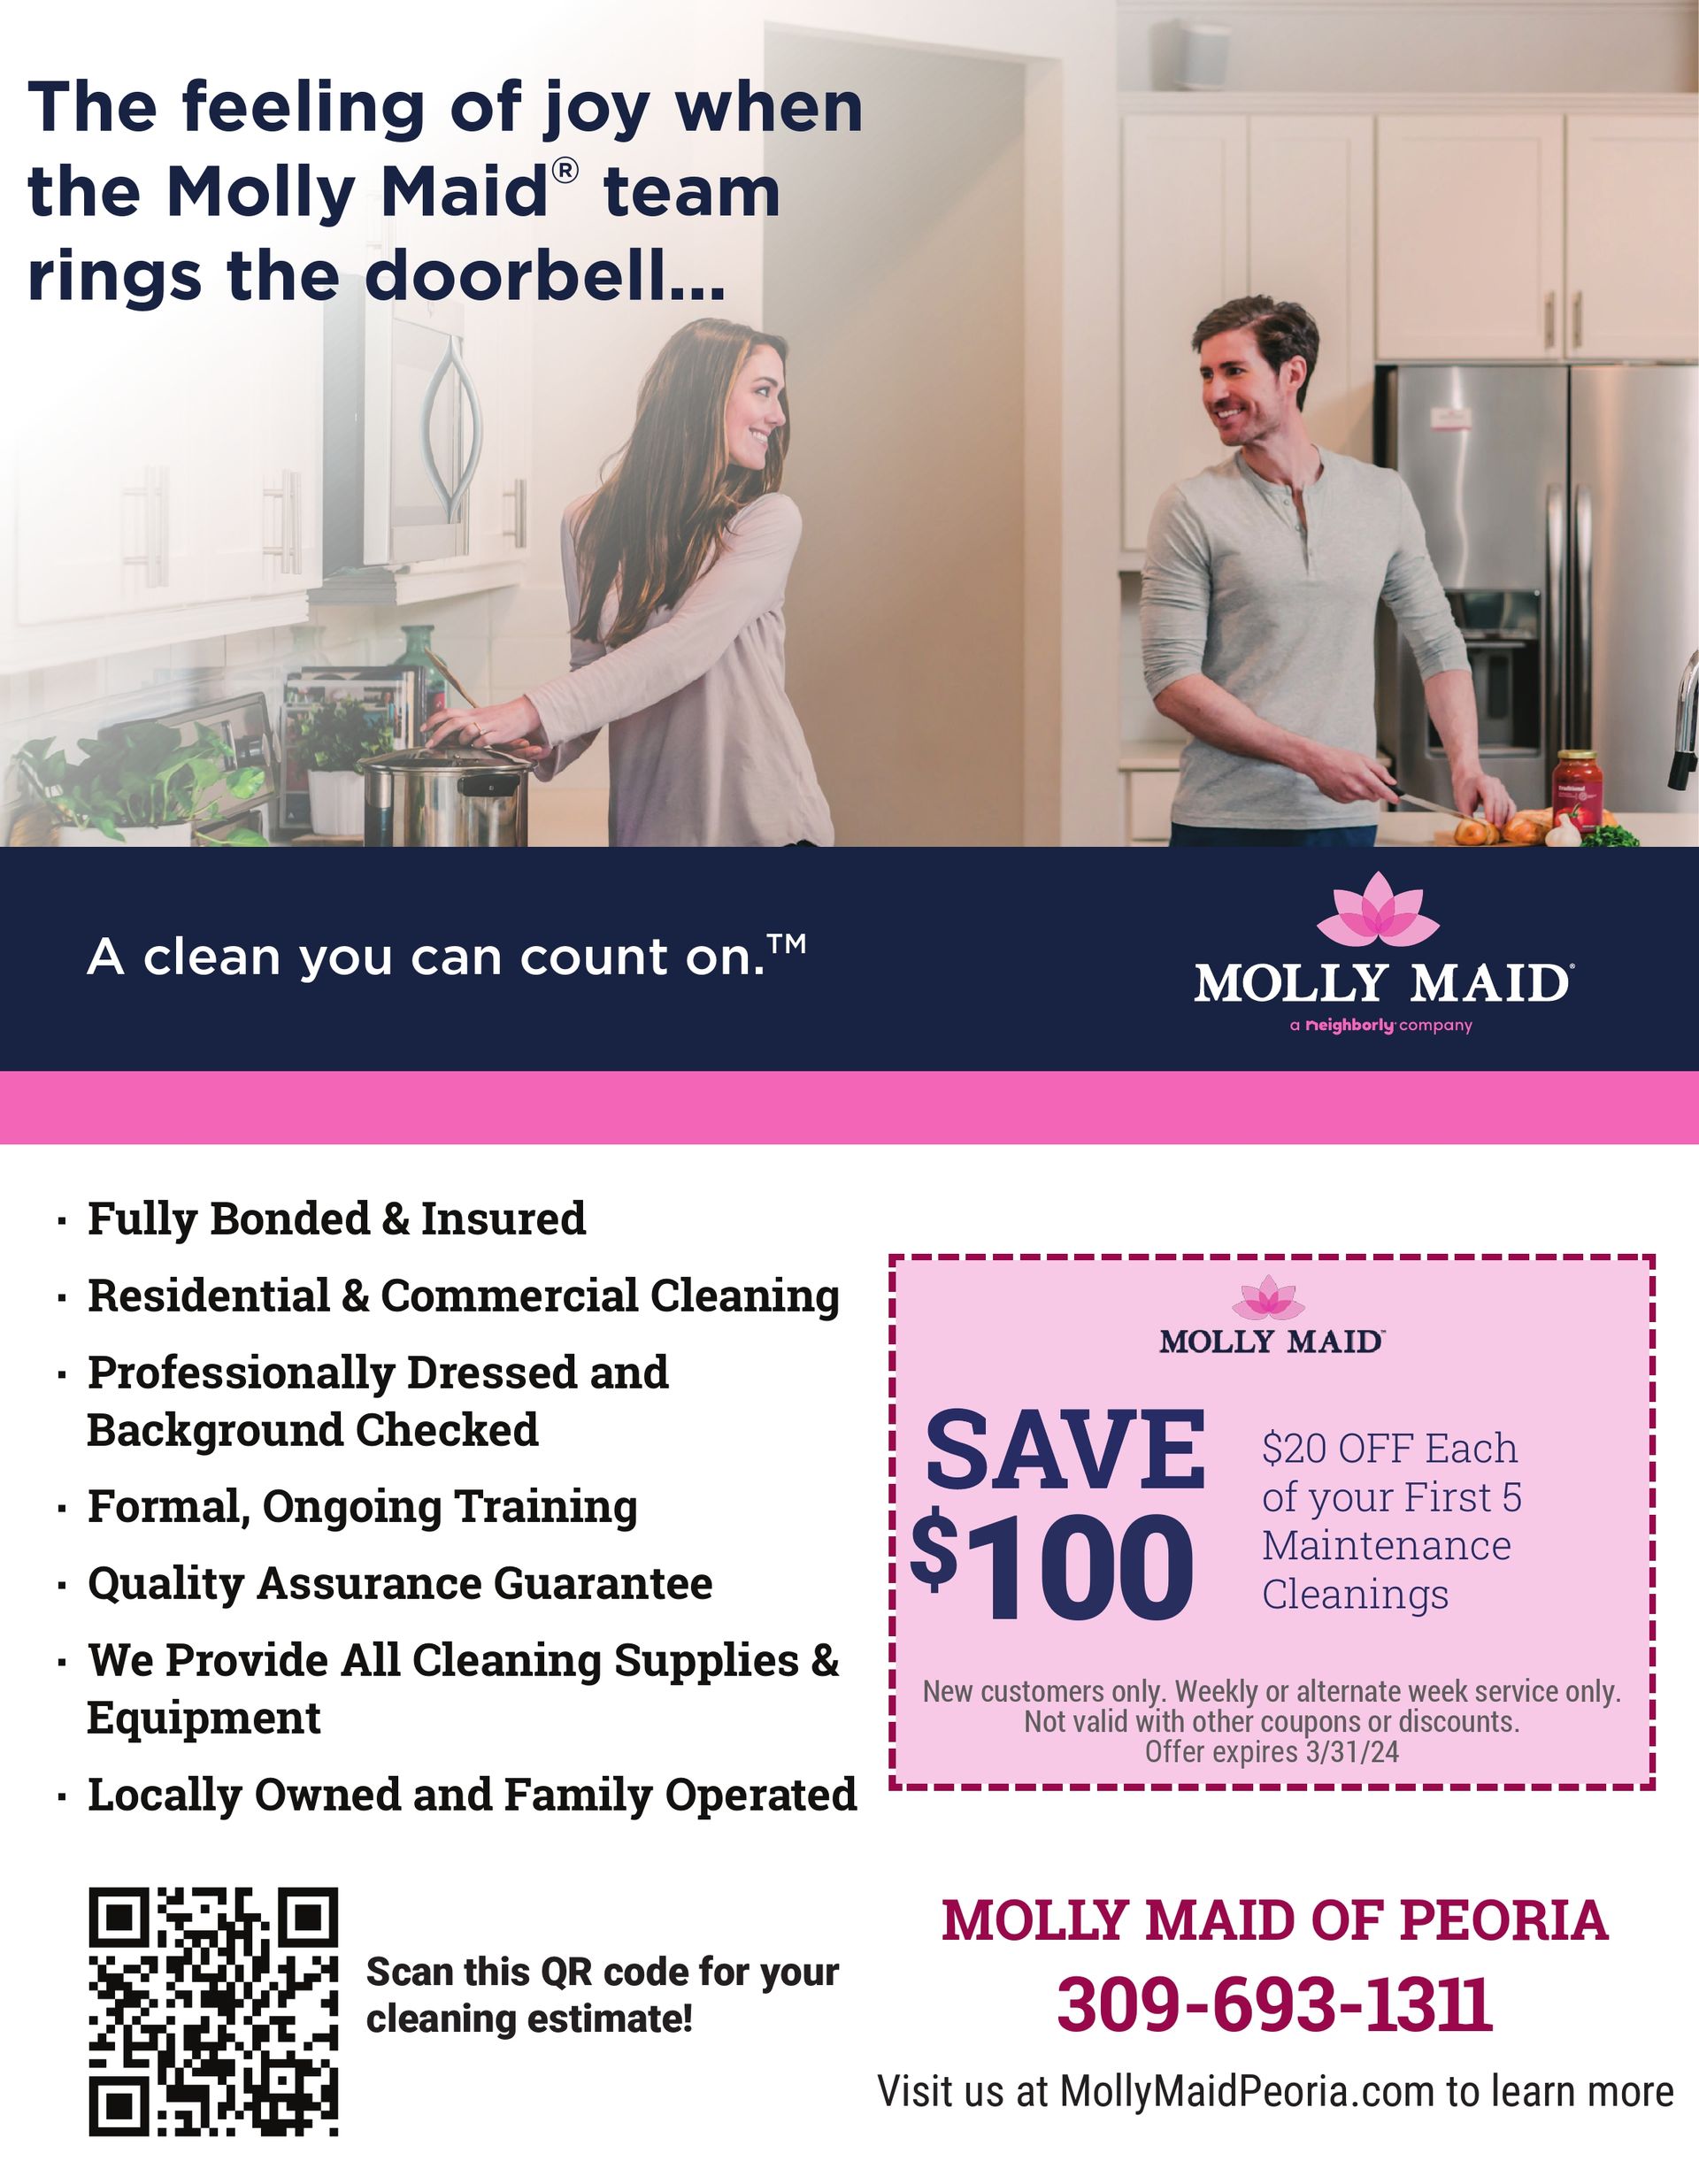 Molly Maid of Peoria house cleaning coupons Tri-County area Peoria, IL